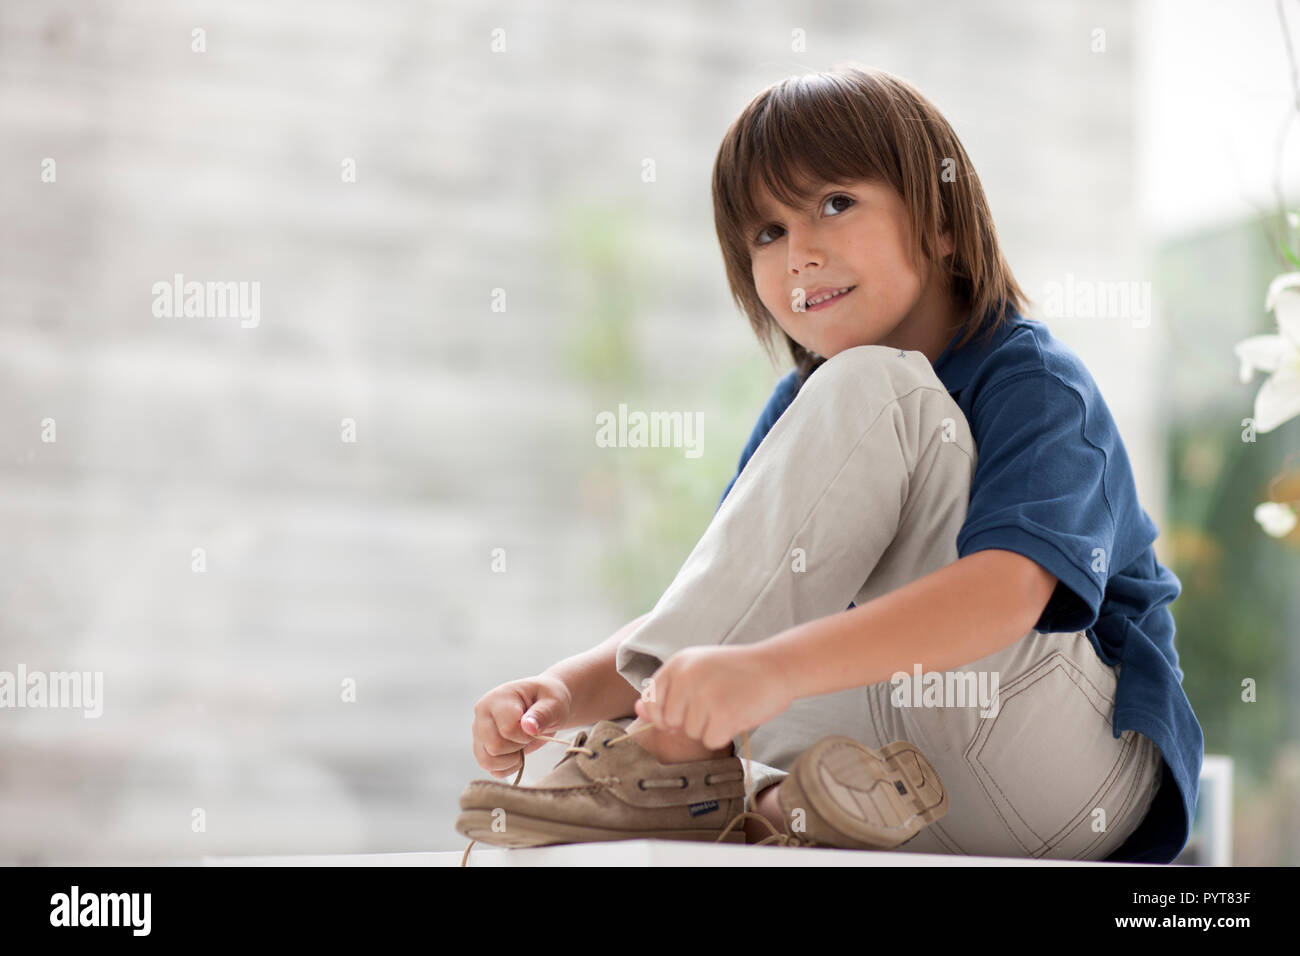 Young boy ties his shoelaces Stock Photo - Alamy